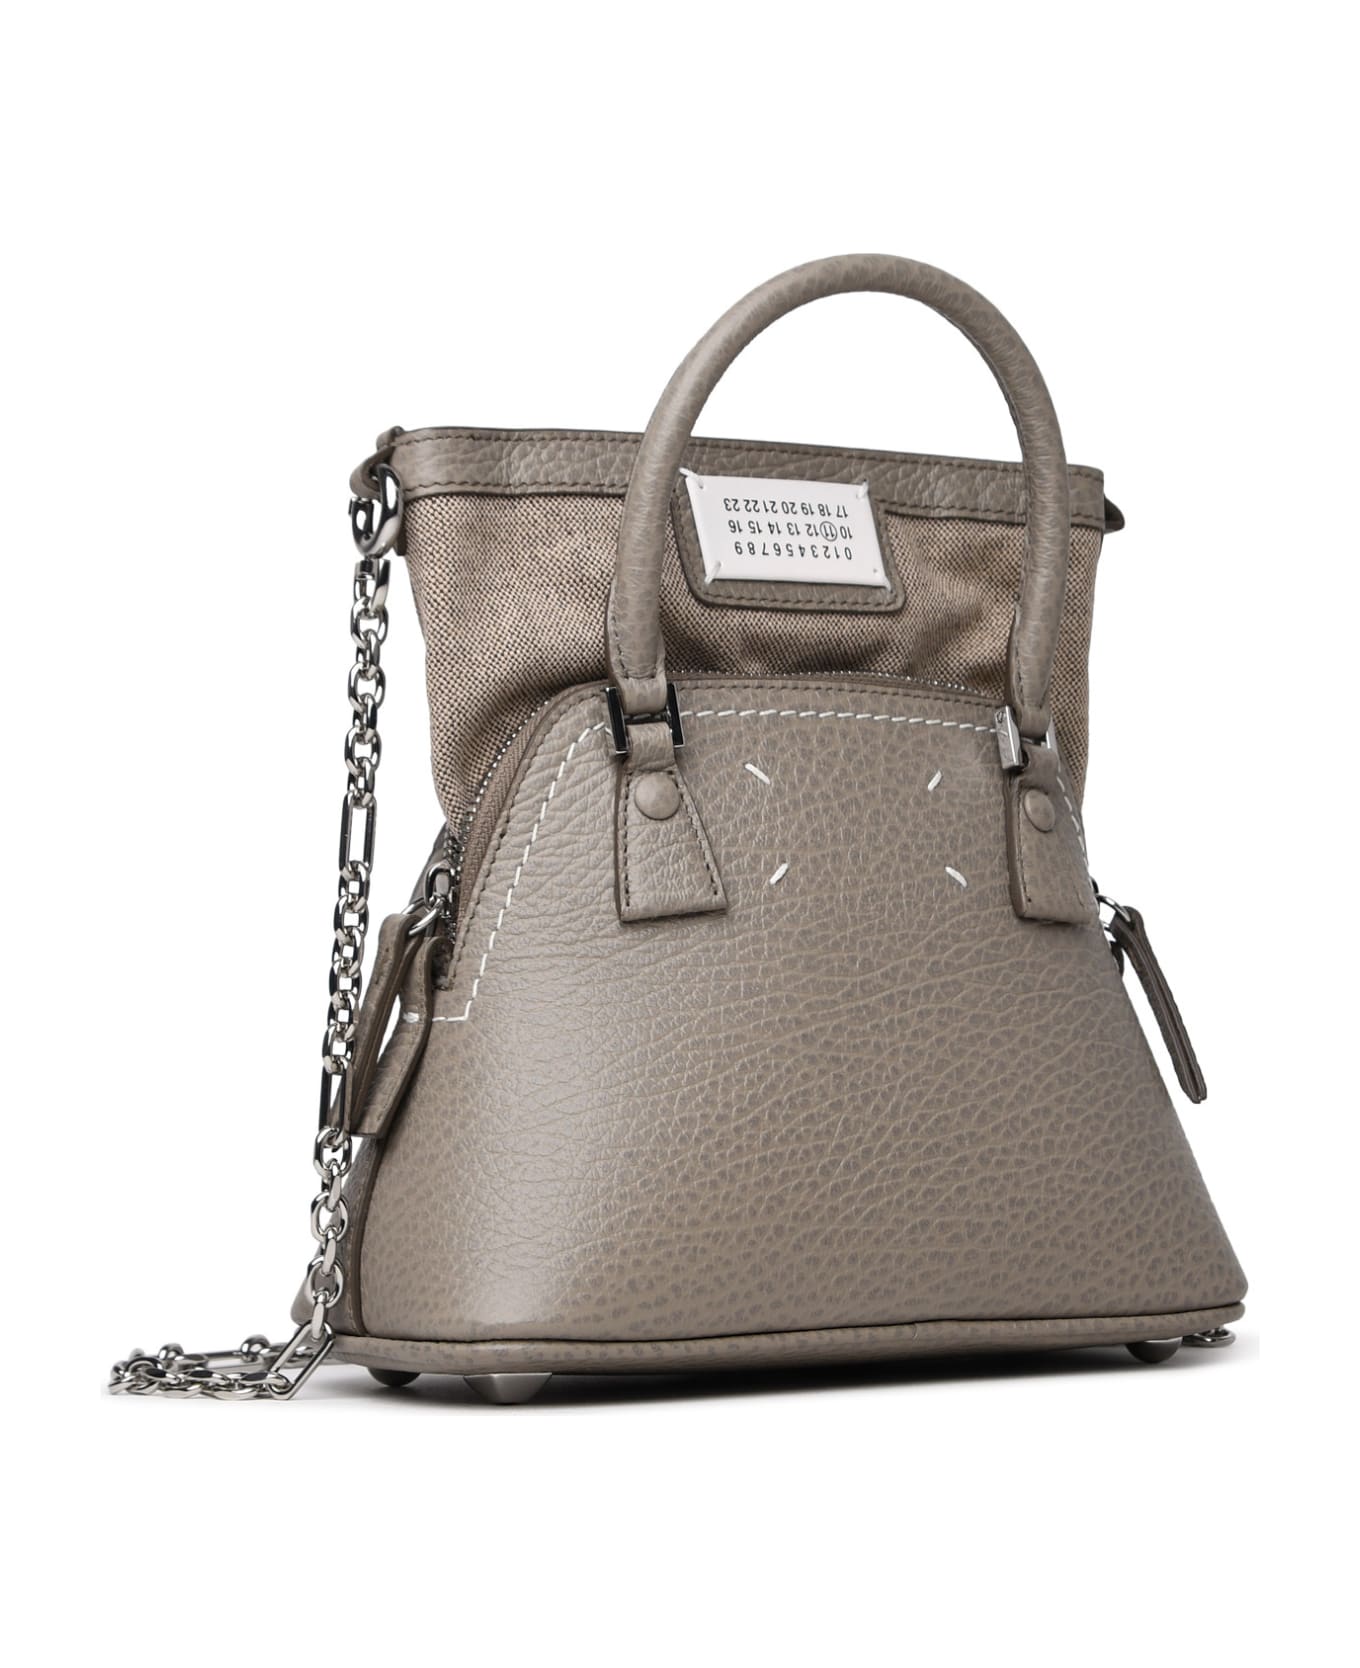 Maison Margiela Micro '5ac Classique' Bag In Dove-gray Leather - Grey トートバッグ